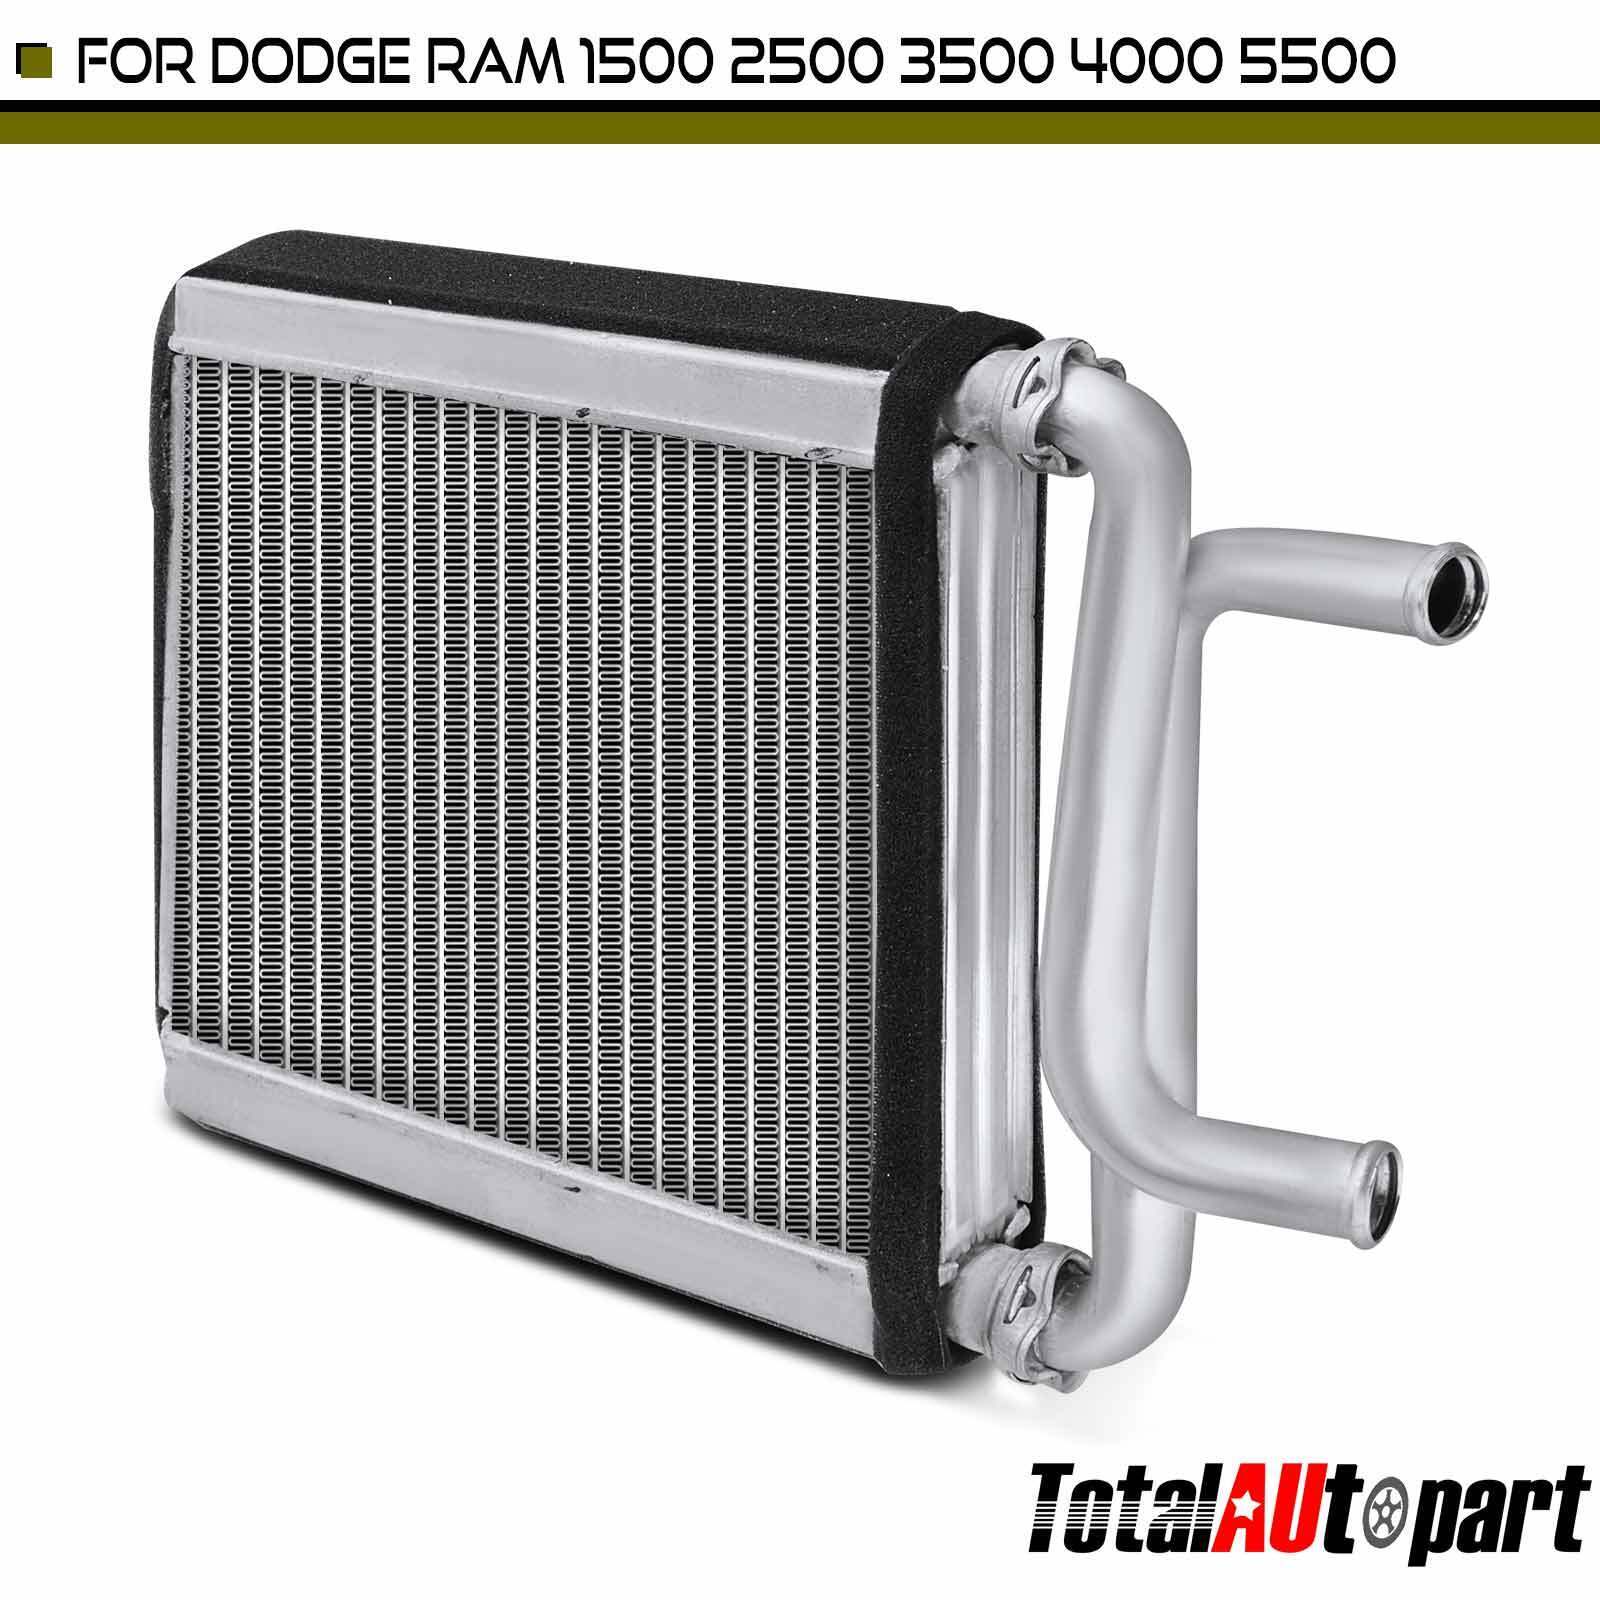 New HVAC Heater Core for Dodge Ram 1500 2500 3500 4000 4500 5500 2008-2010 Front